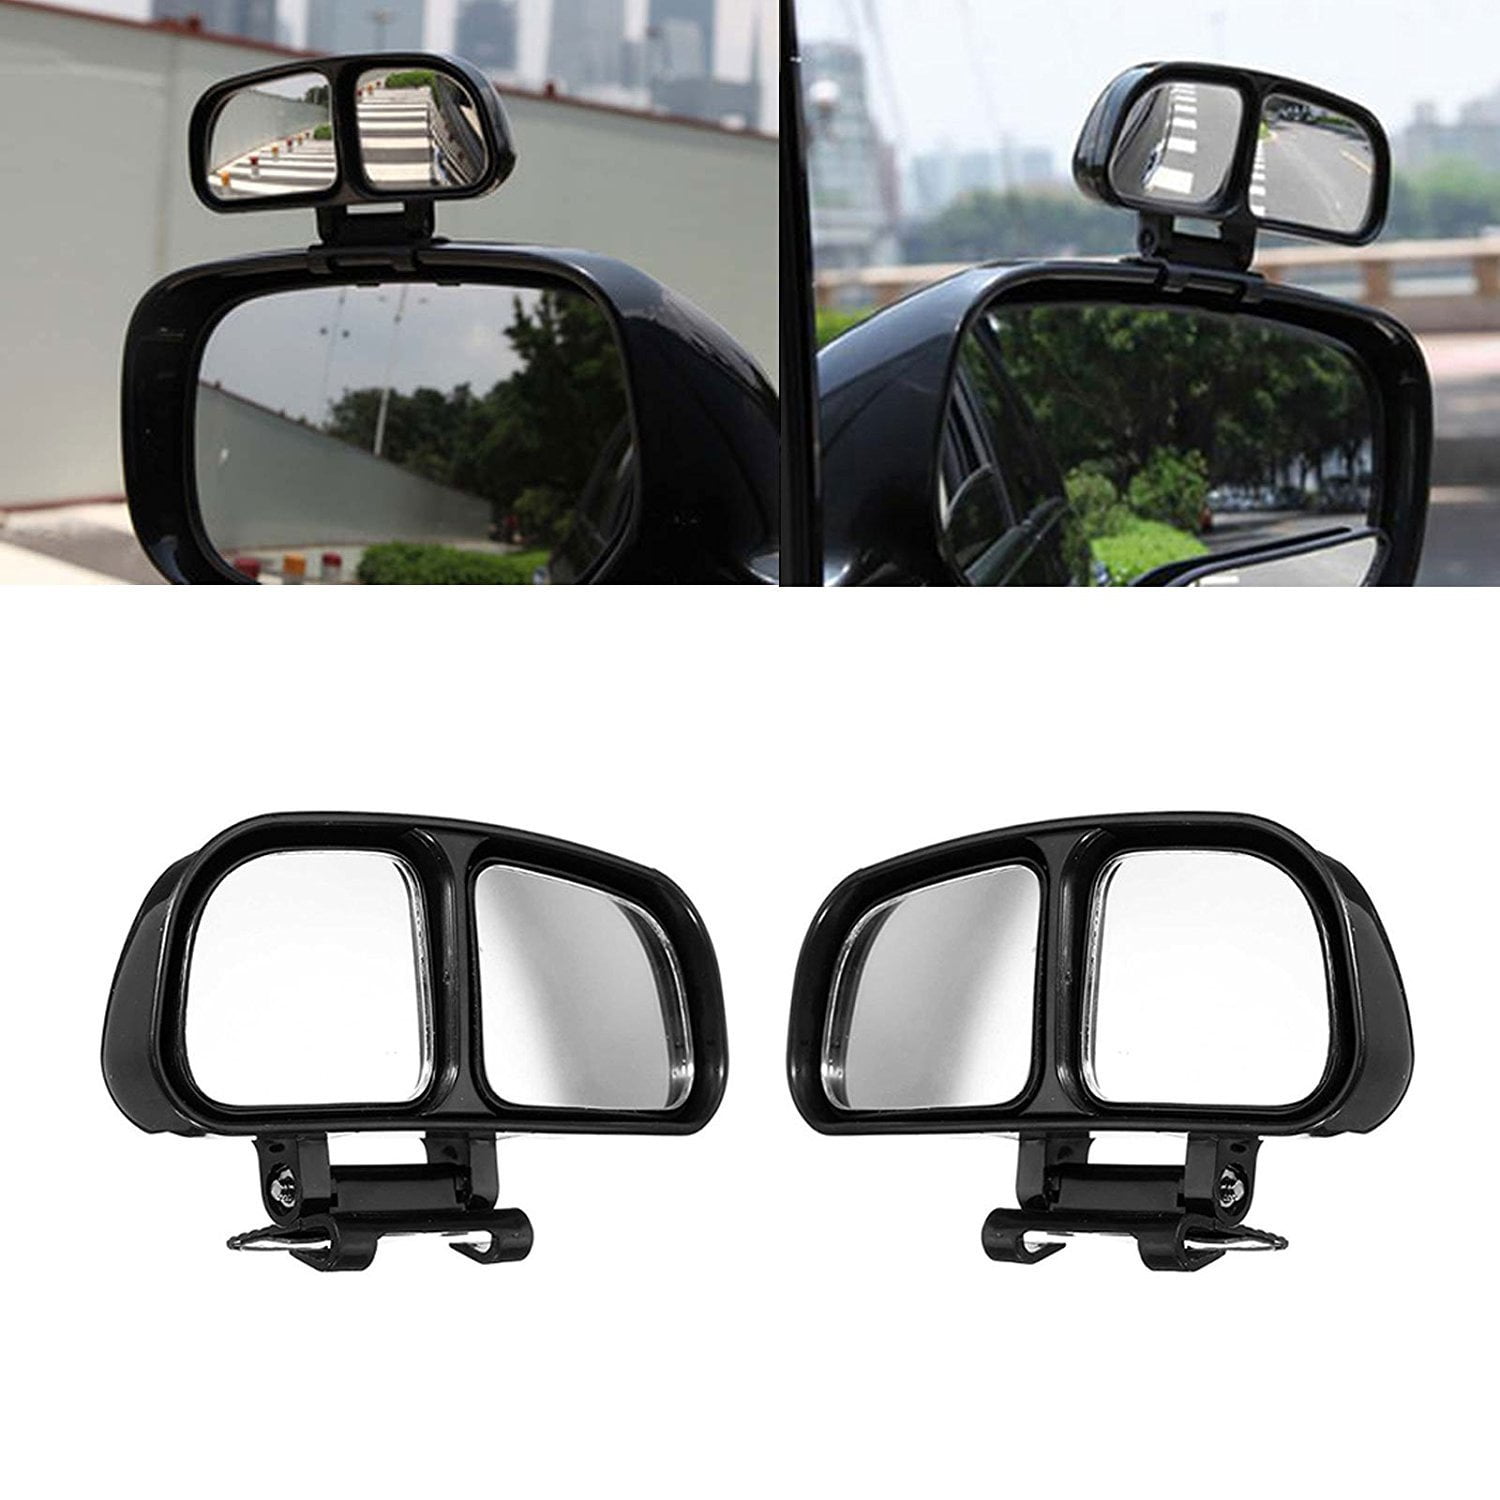 Rearview Convex Adjustable Side Mirrors PRETTYGAGA Blind Spot Mirror Frameless Sway Rotate Wide Angle Rear View Mirror HD Glass Fan Shape Stick 